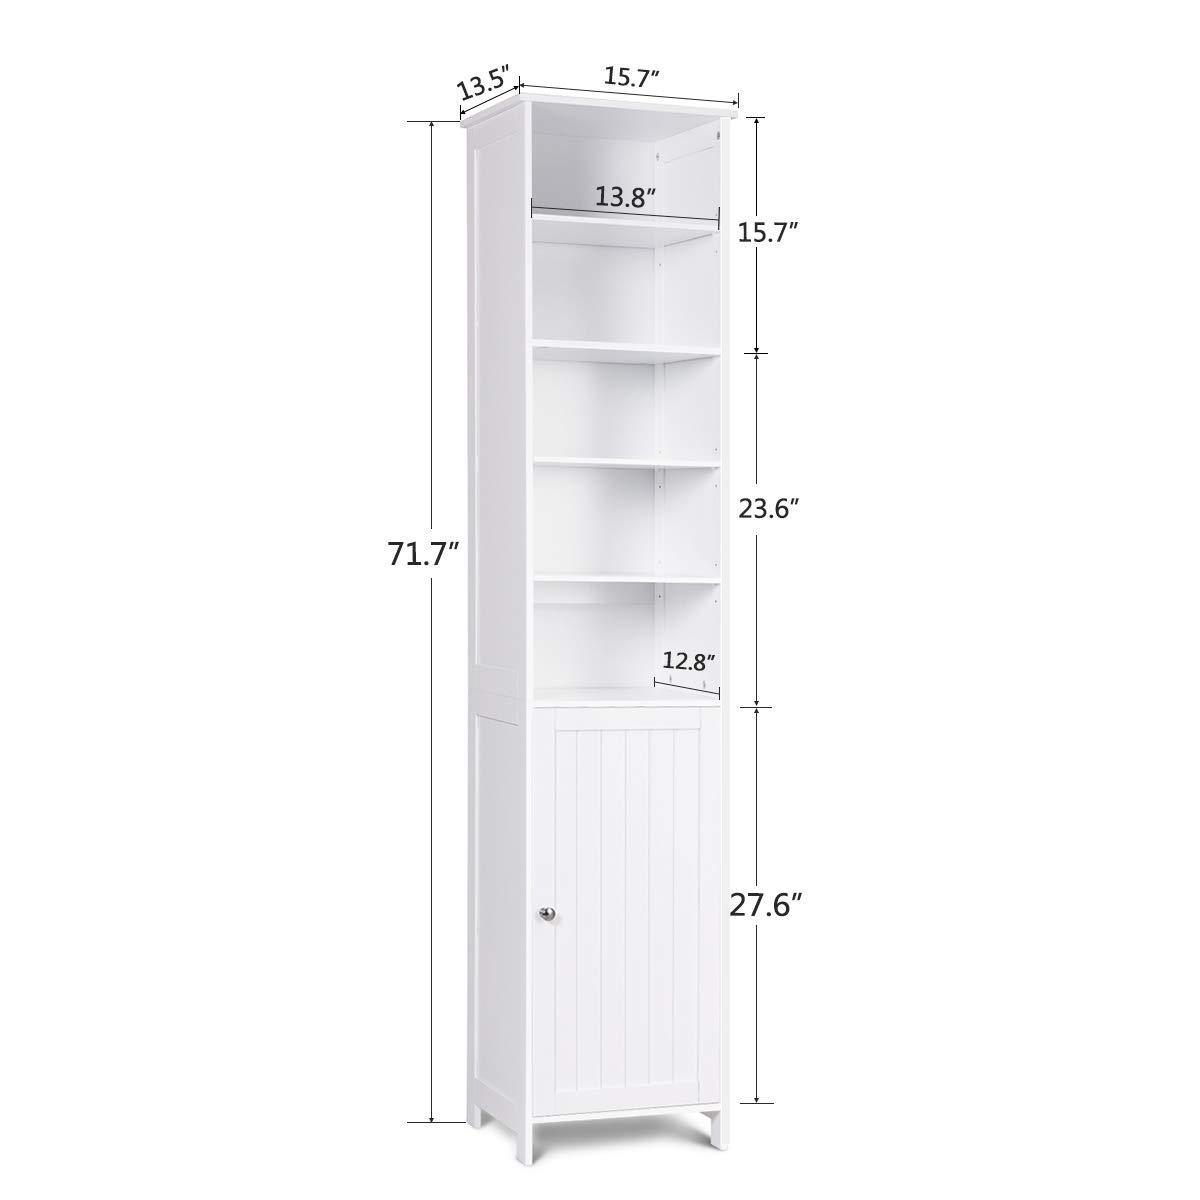 New 72 tall cabinet waterjoy standing tall storage cabinet wooden white bathroom cupboard with door and 5 adjustable shelves elegant and space saving